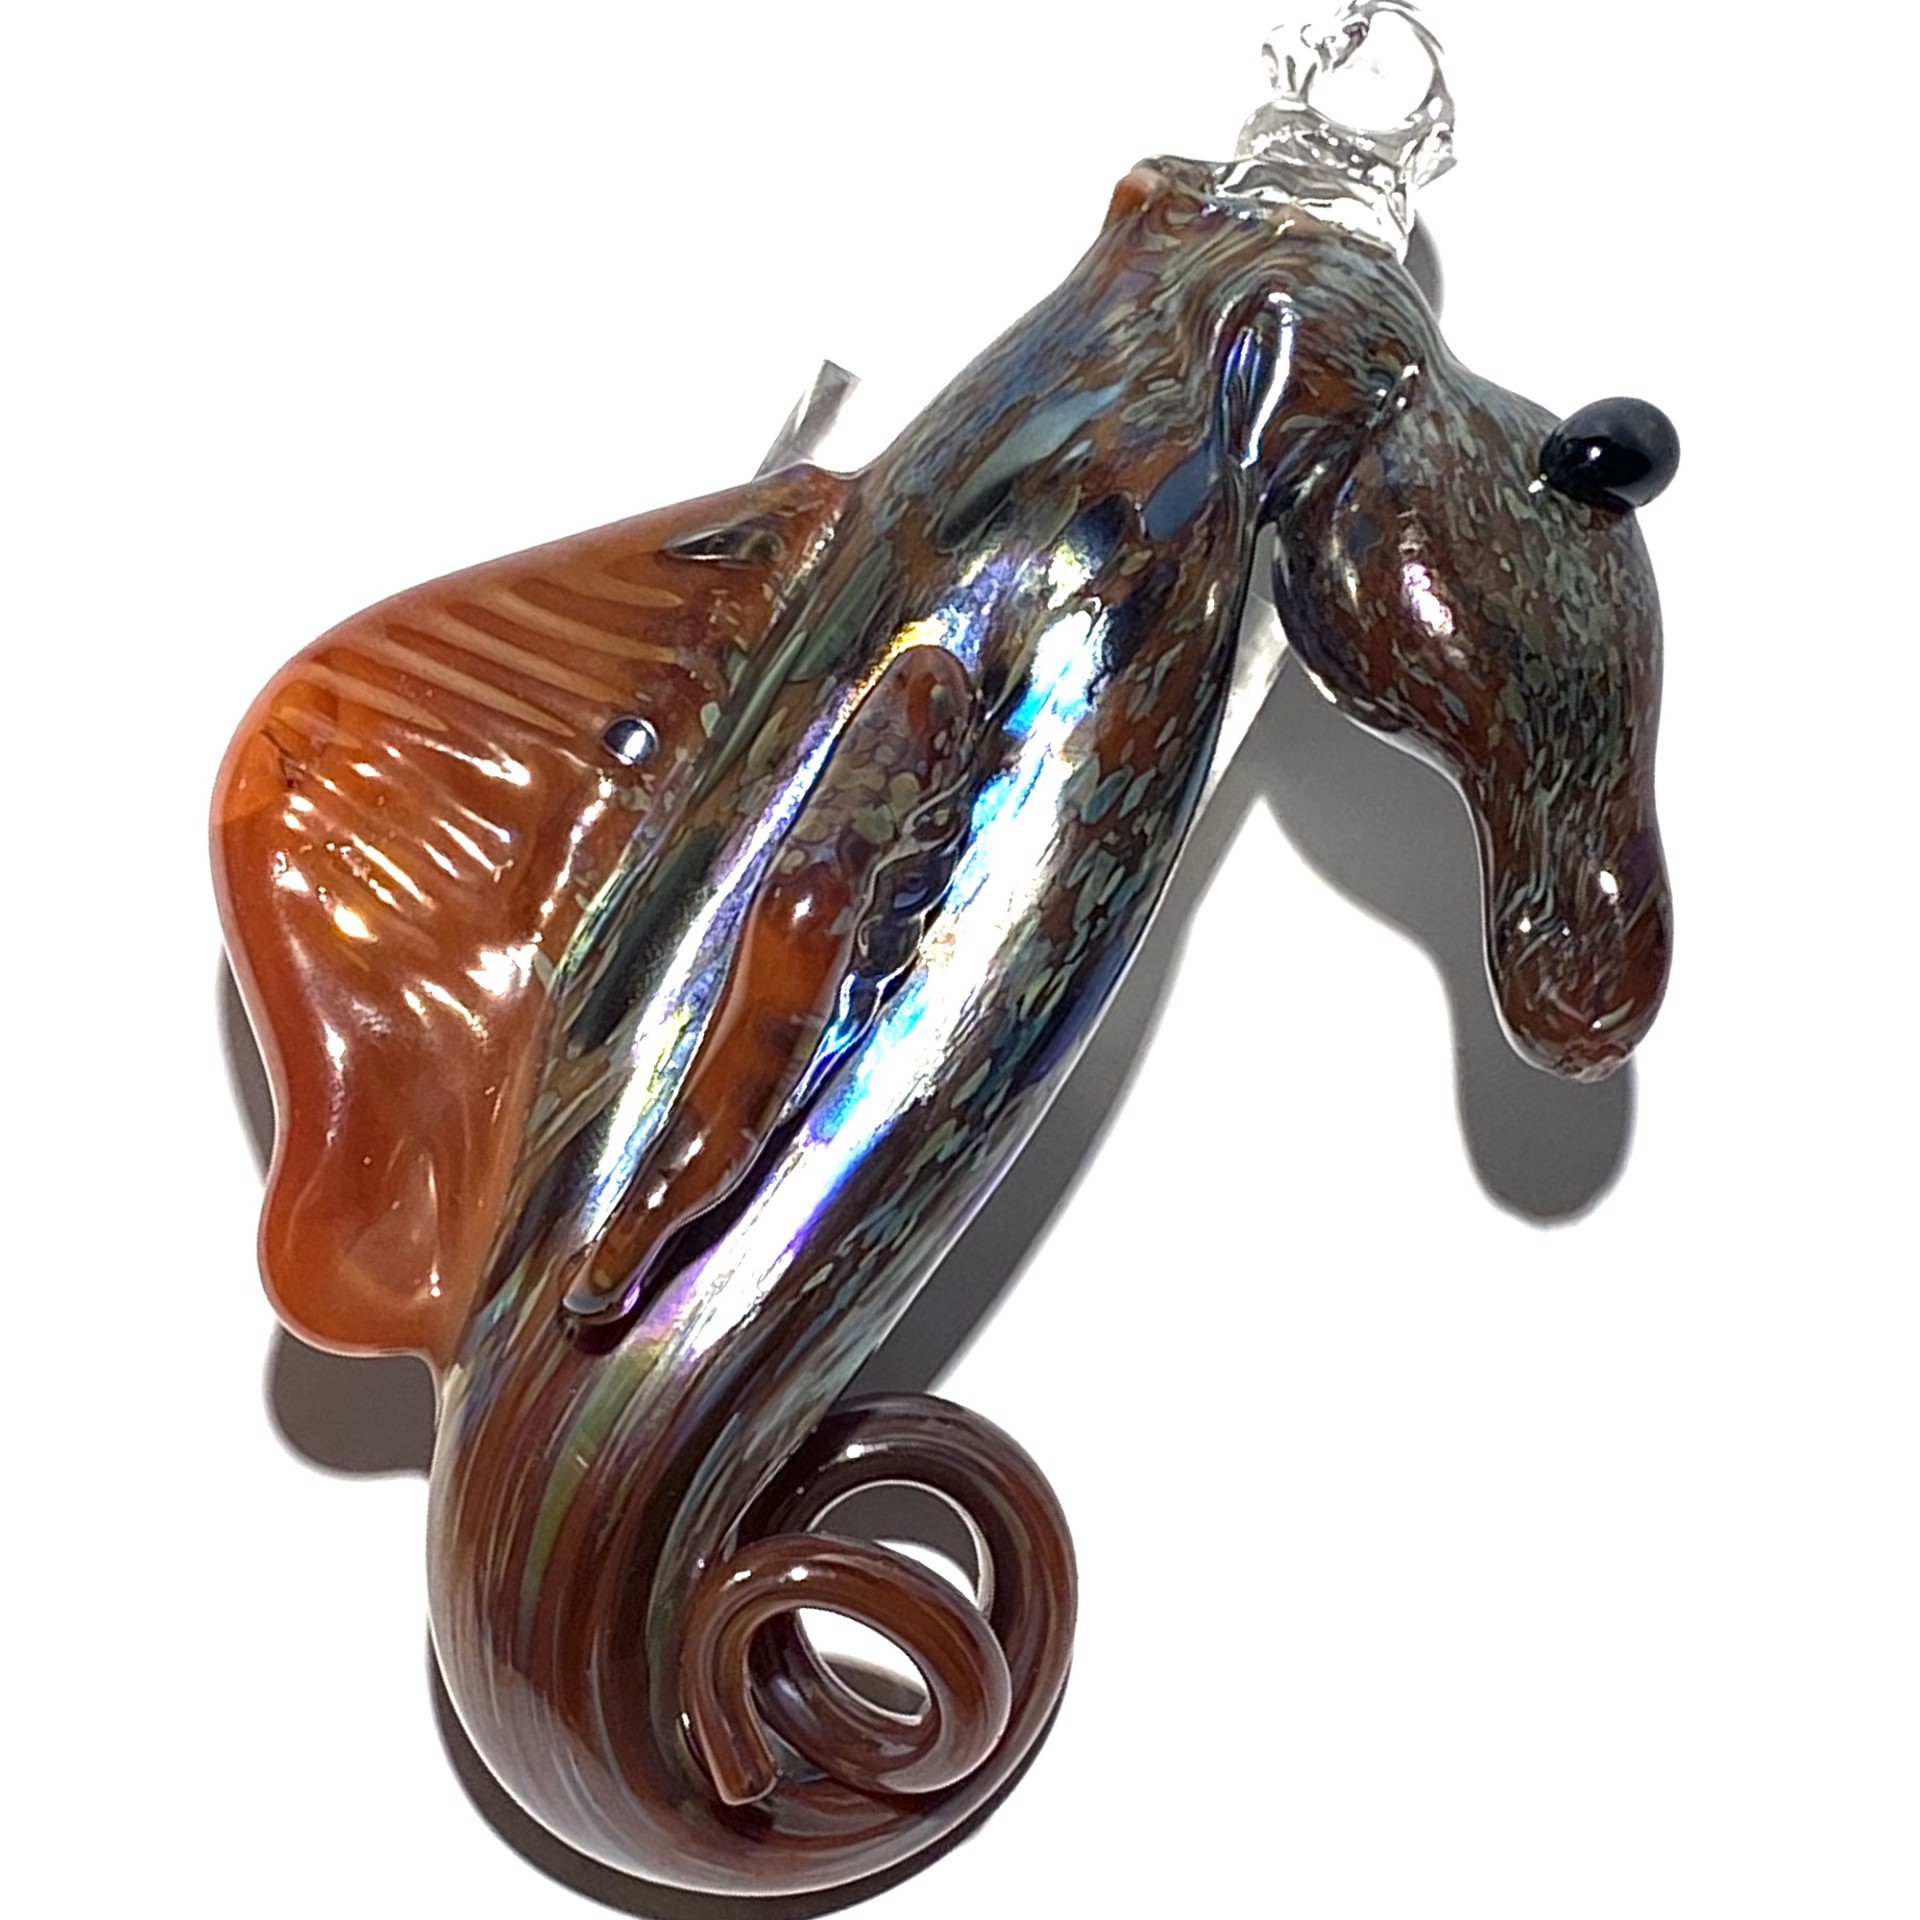 Seahorse-Brown and Blue, Ornament, JG1 by John Glass